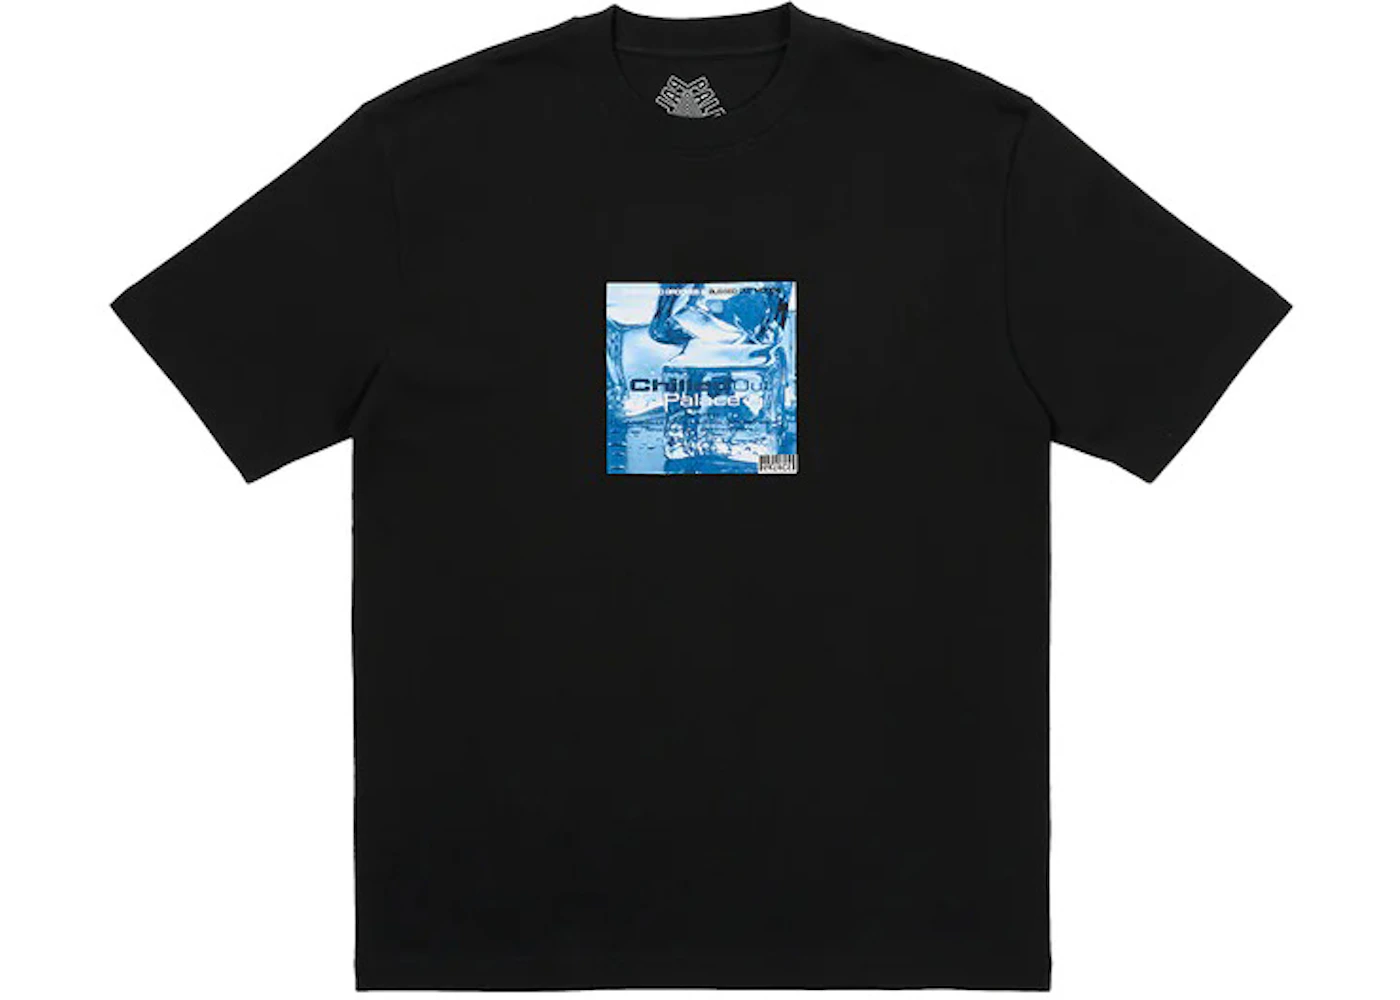 Palace Blissed Out T-Shirt Black Men's - SS23 - US